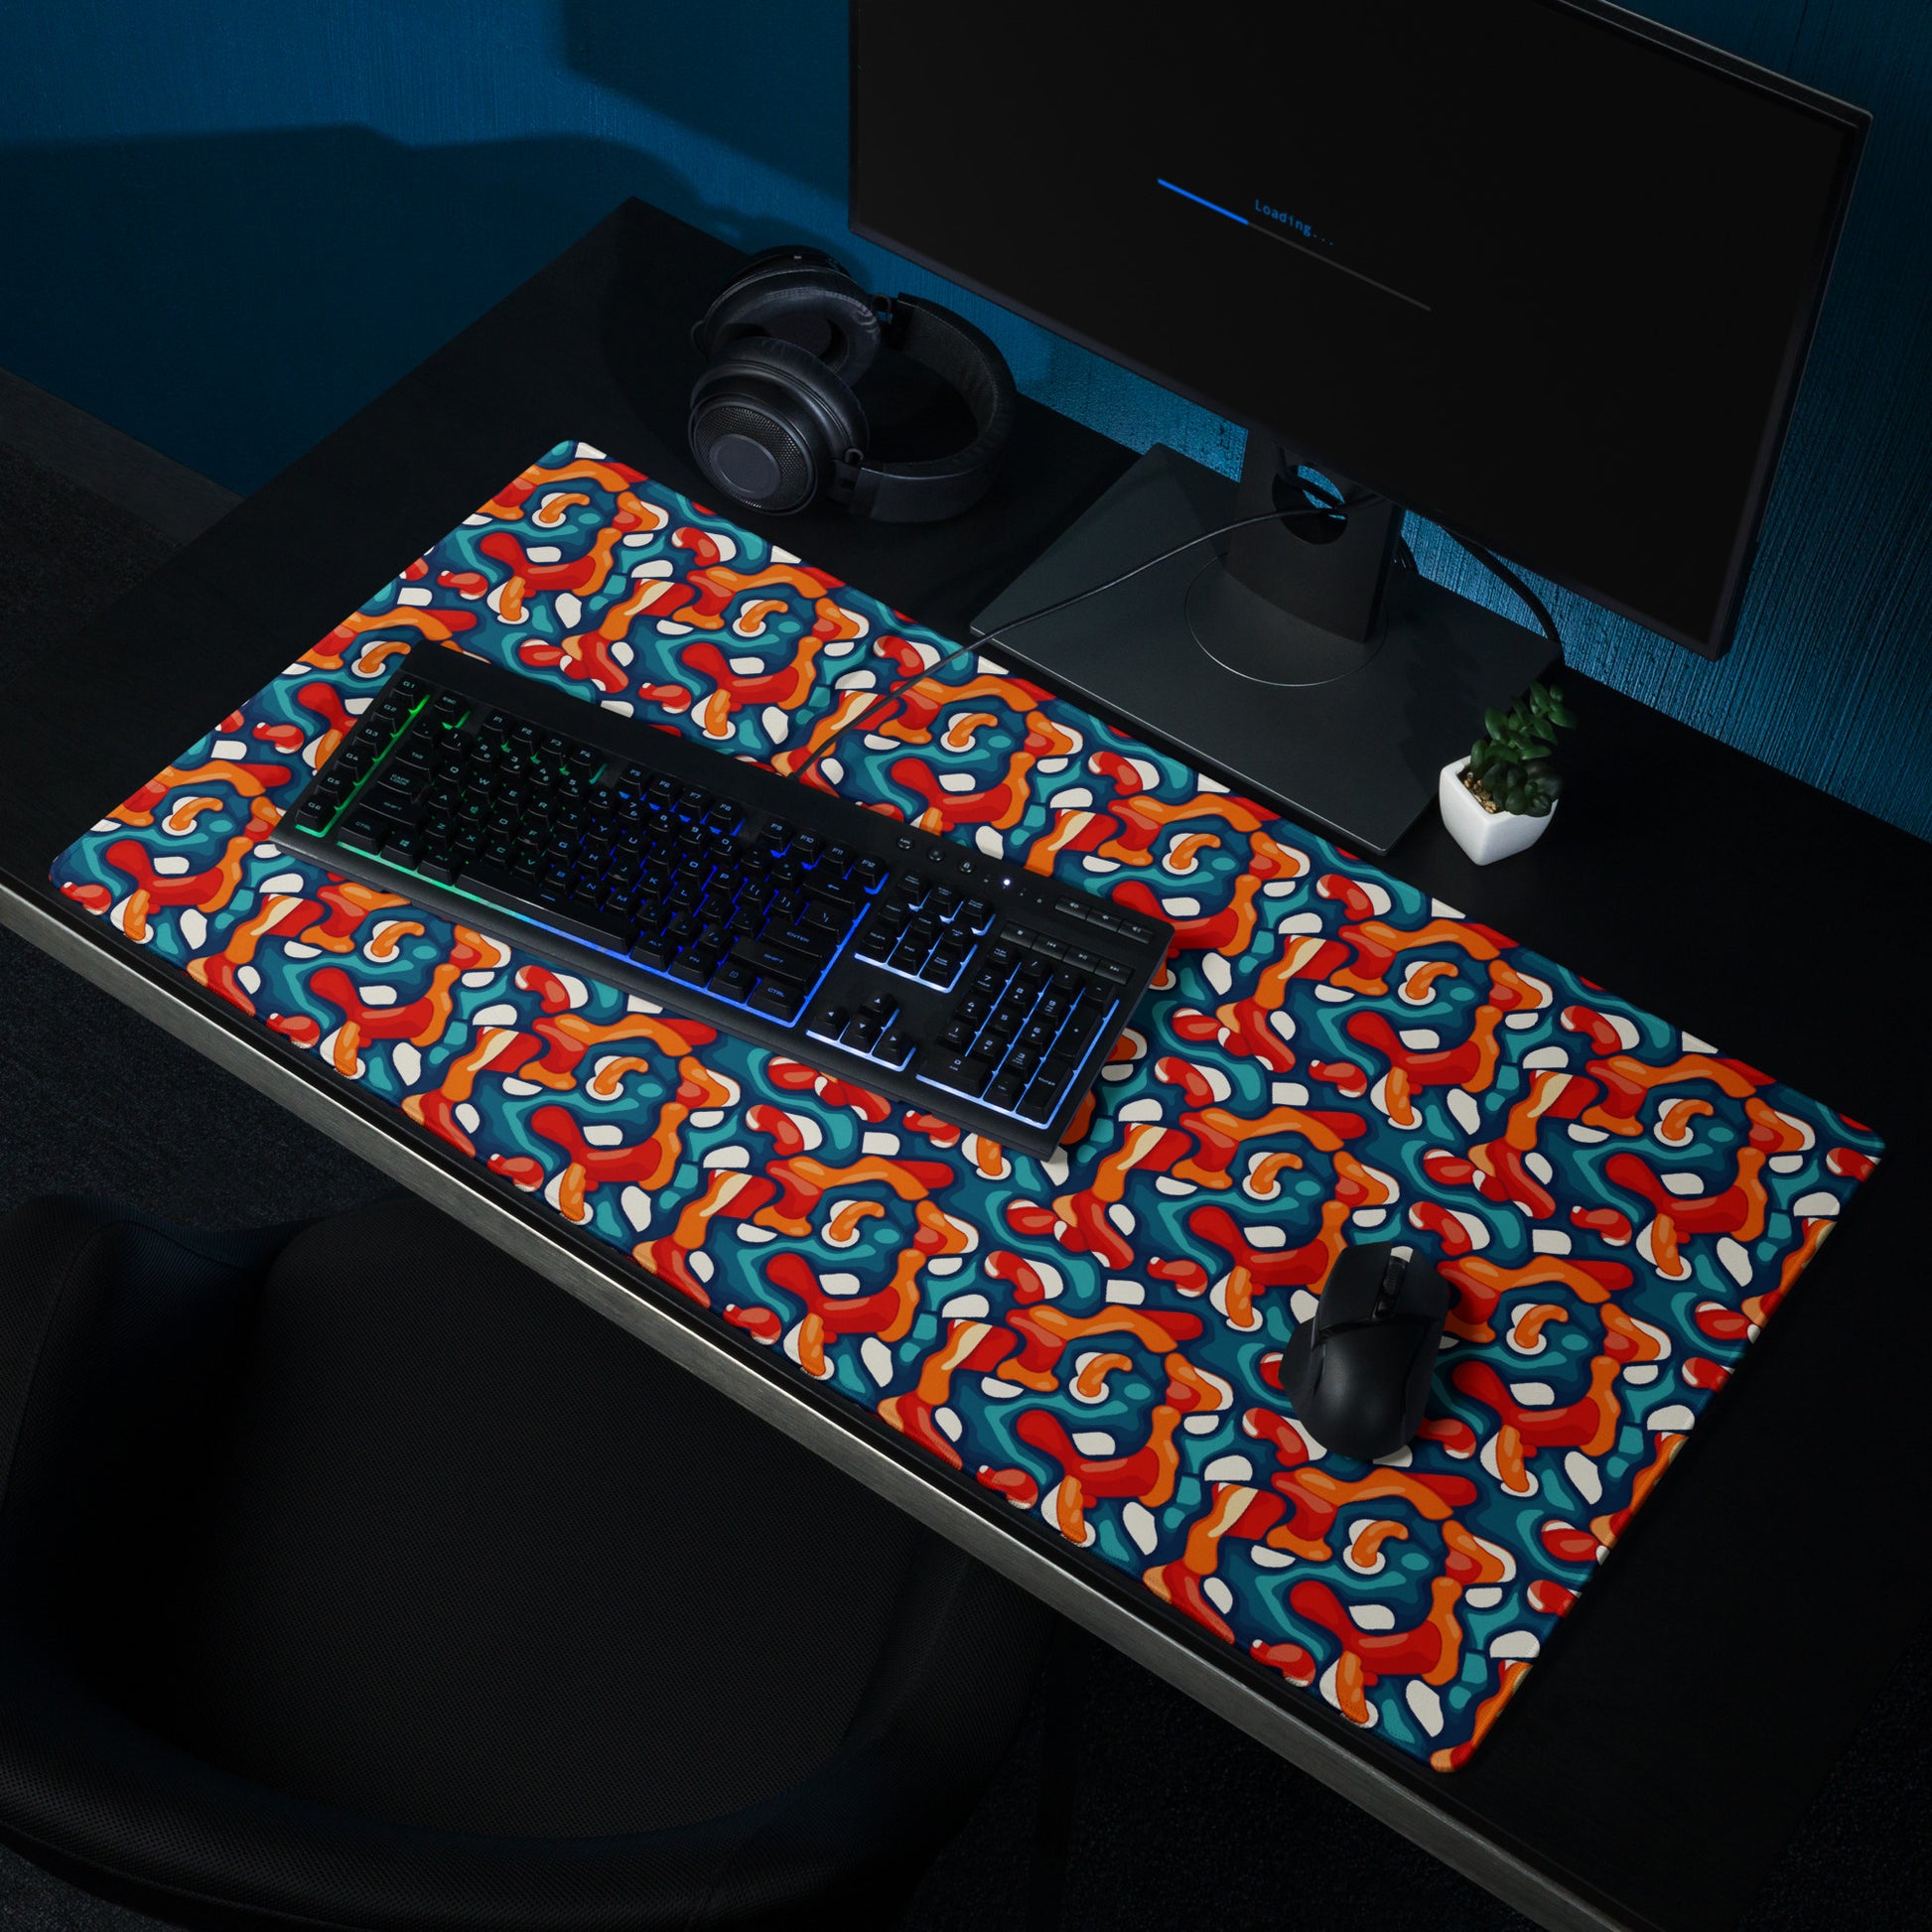 A 36" x 18" desk pad with abstract line art on it shown on a desk setup. Red, Teal and Orange in color.